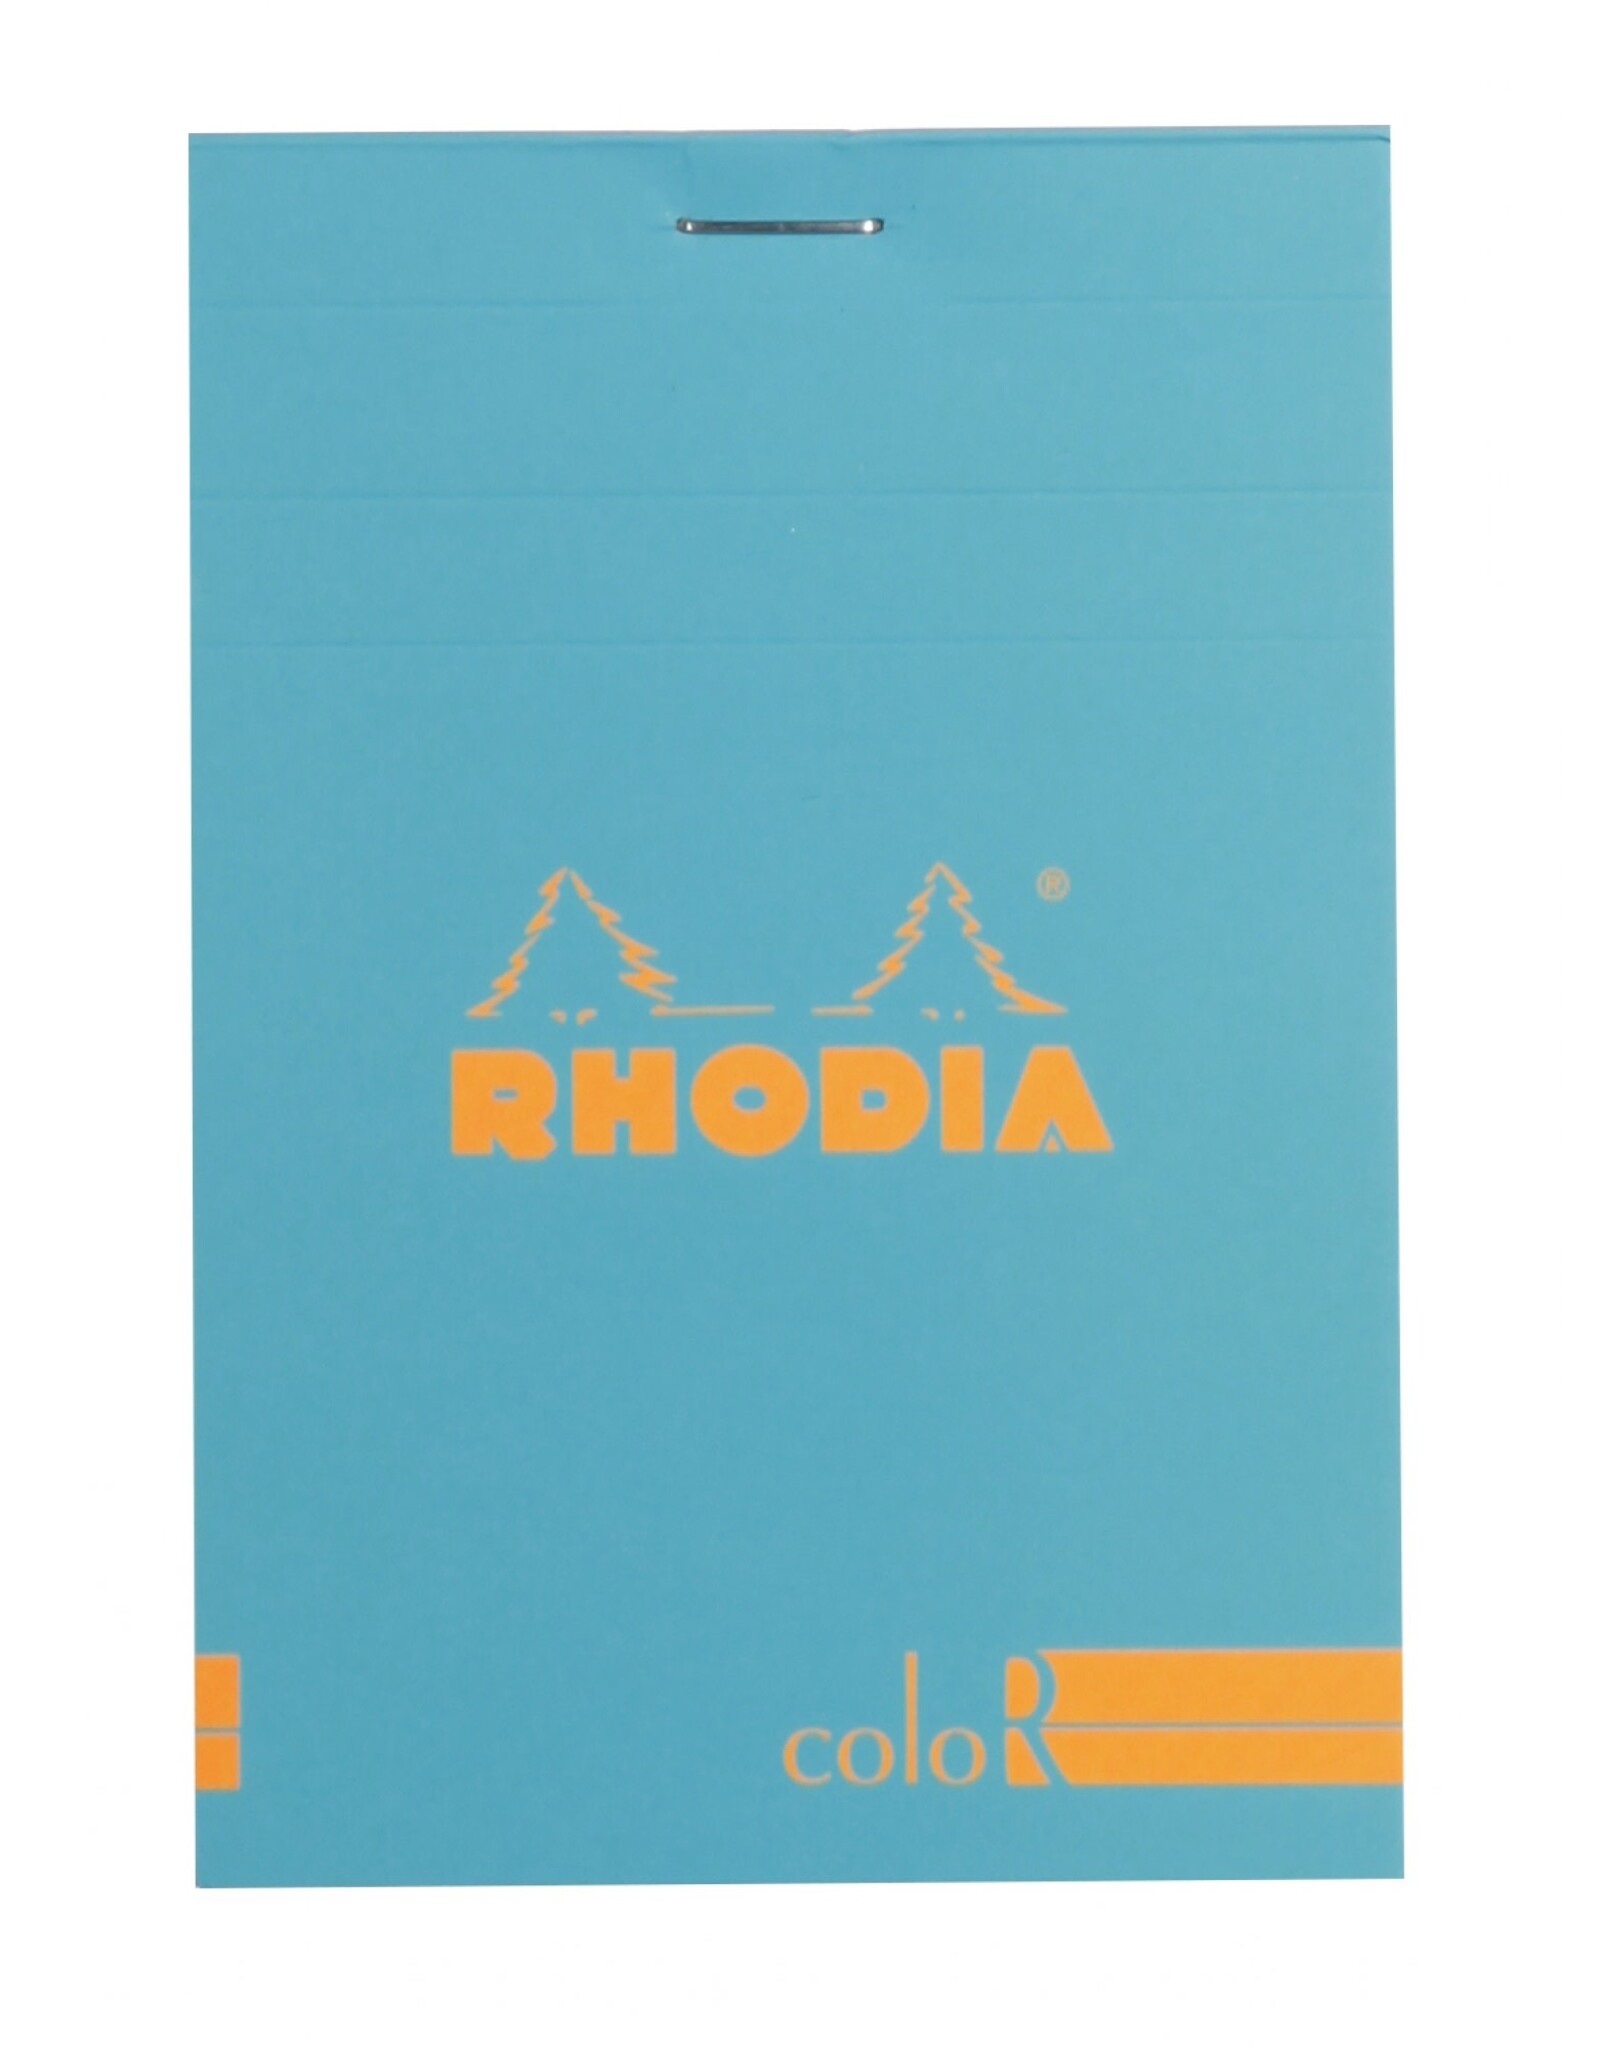 Rhodia Rhodia ColoR Pad, 70 Lined Sheets, 3 3/8" x 4 3/4", Turquoise